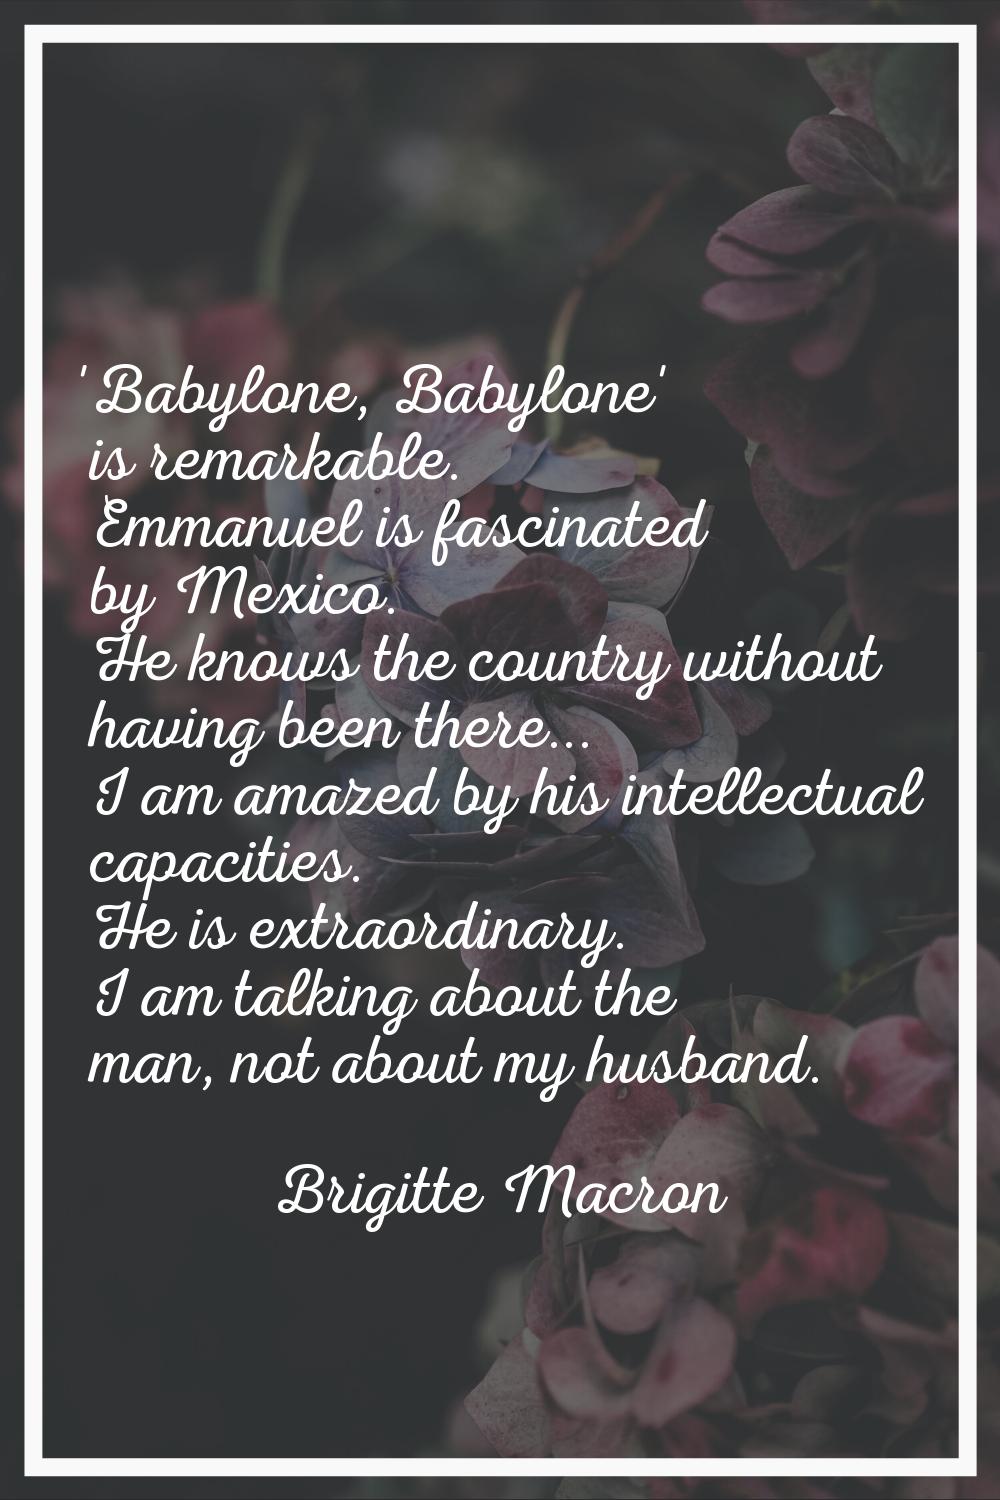 'Babylone, Babylone' is remarkable. Emmanuel is fascinated by Mexico. He knows the country without 